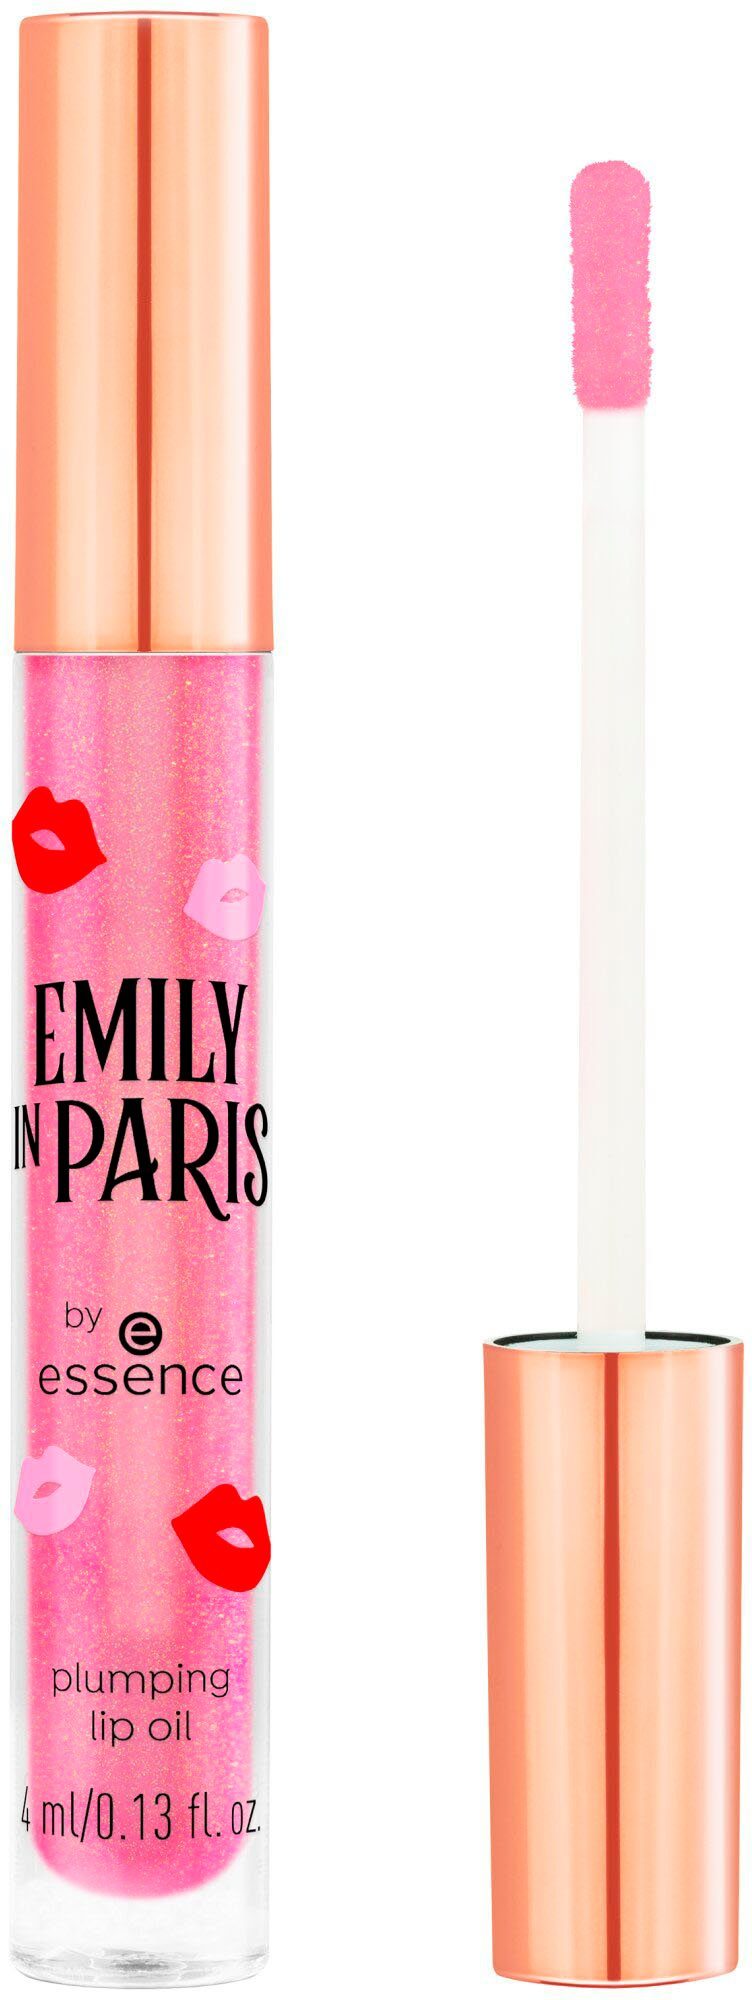 plumping essence Lipgloss EMILY oil Essence by IN lip PARIS